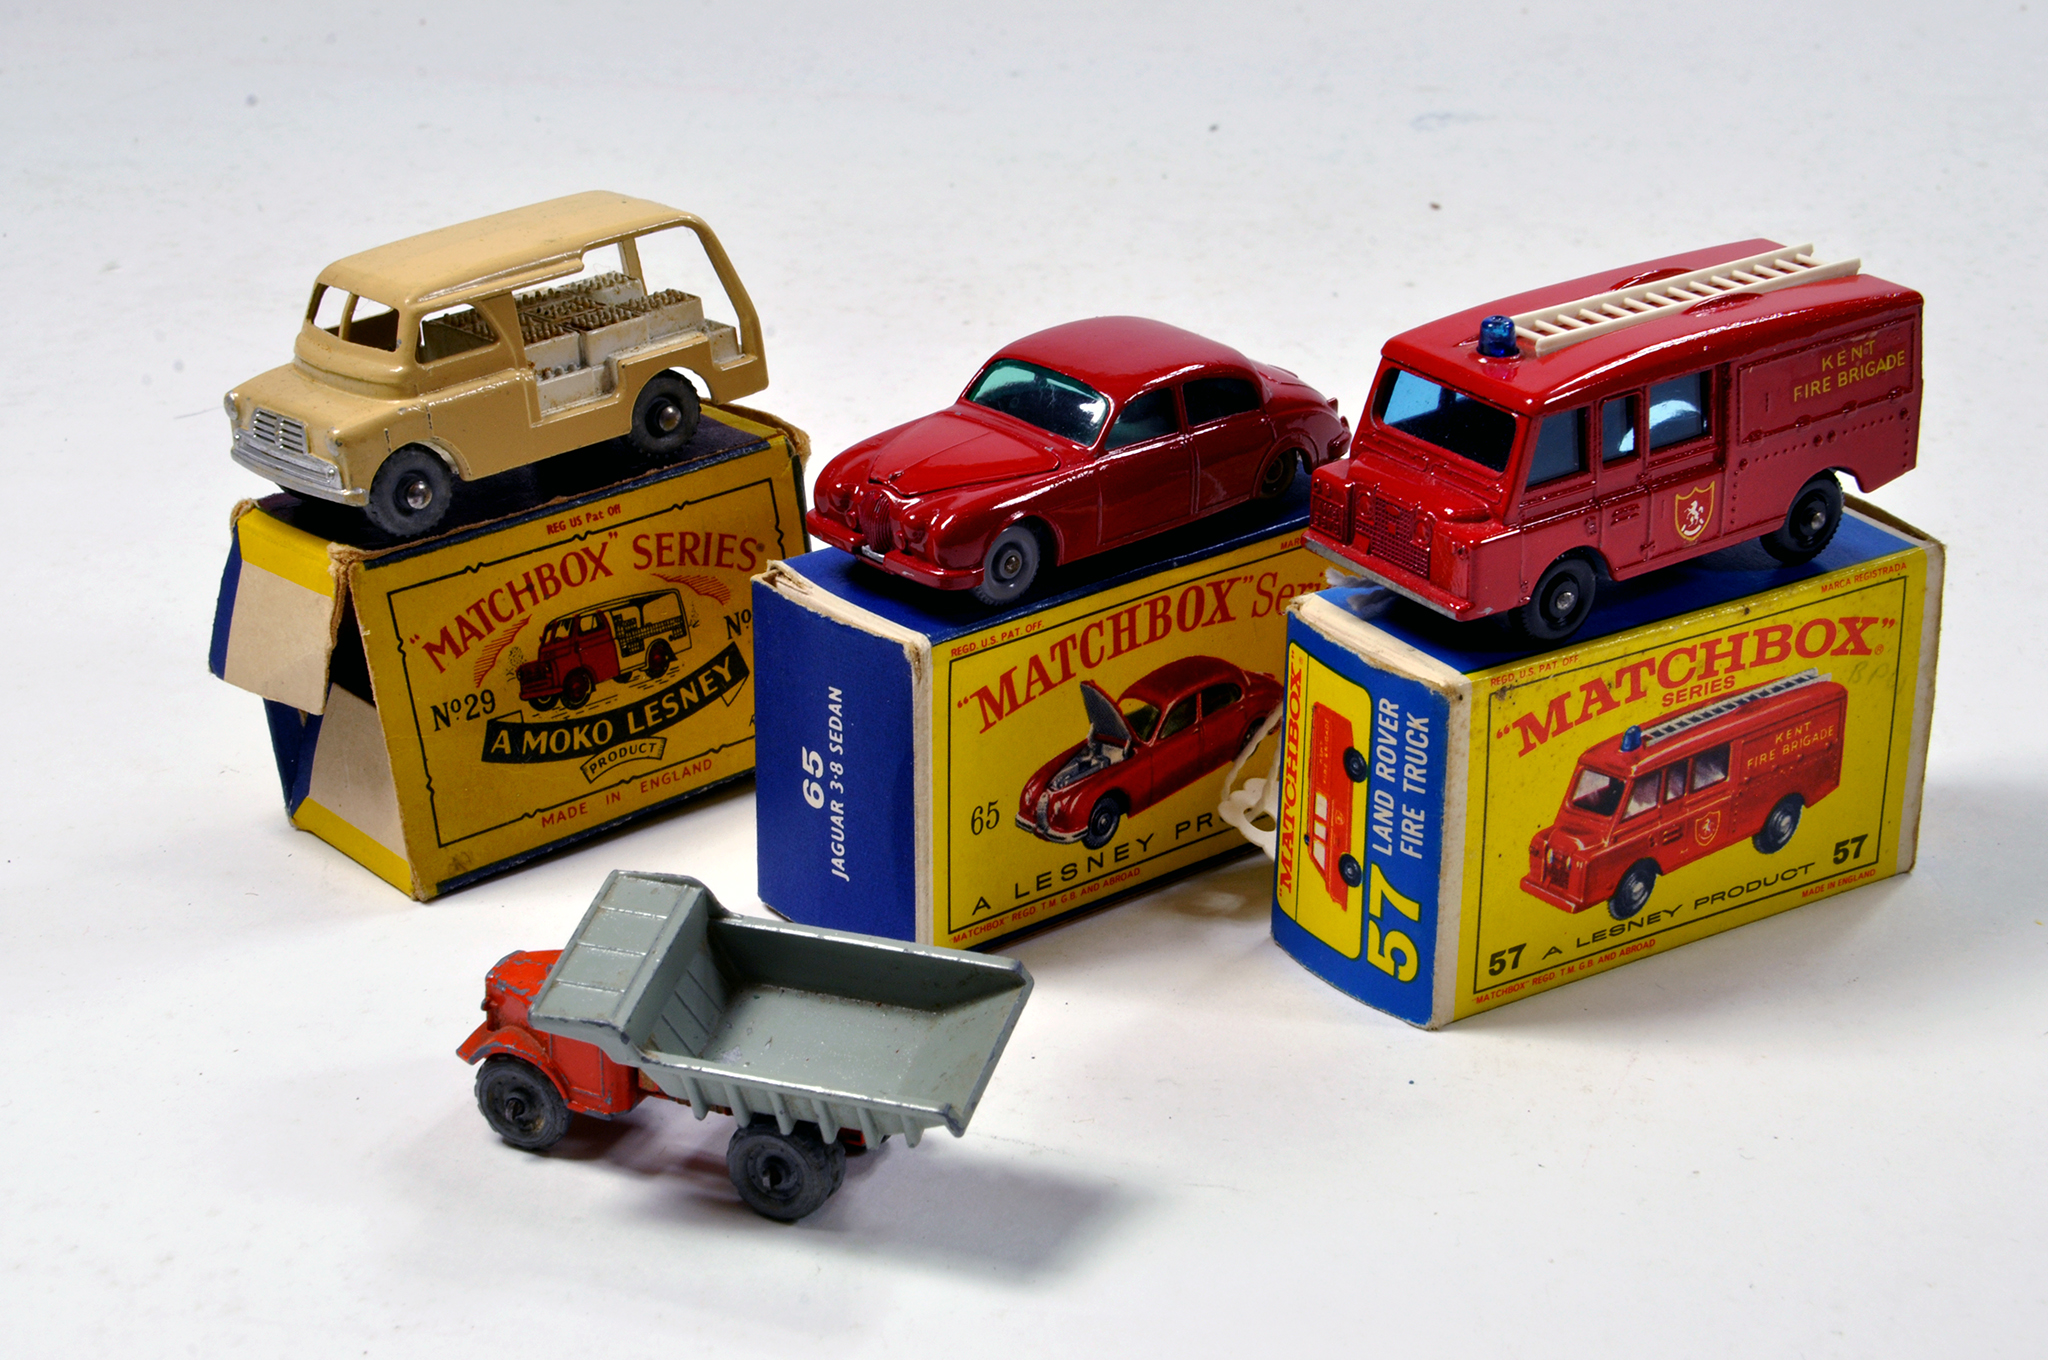 Matchbox Regular Wheels 1-75 issues comprising No. 29, No. 65, 57 and one other. Generally G to NM